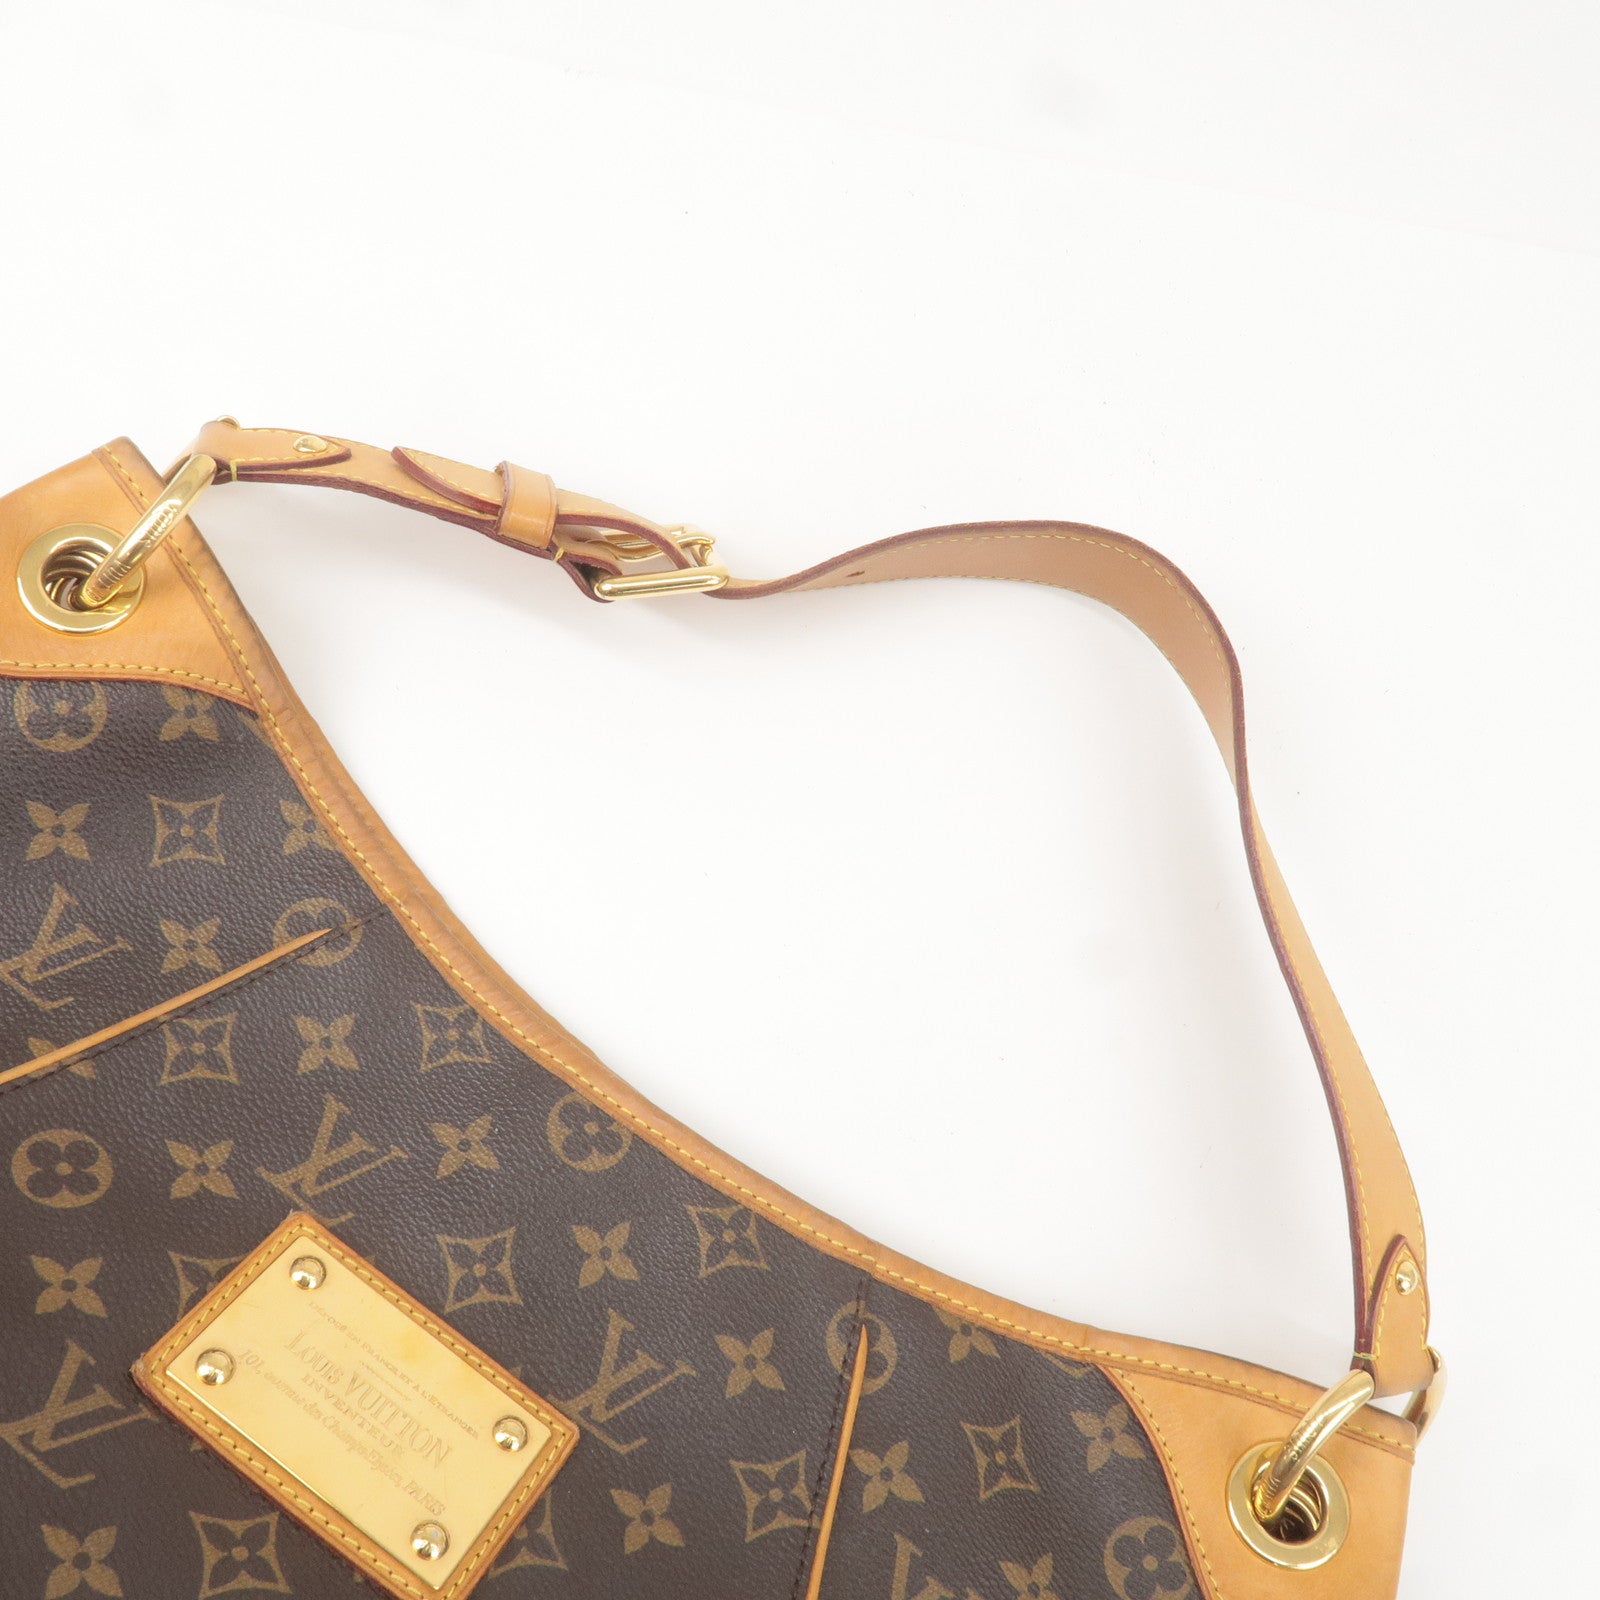 Sold Louis Vuitton Monogram Canvas Galliera (knock off) GM M56381 Includes Dust  Cover & Manufacturers Date Code